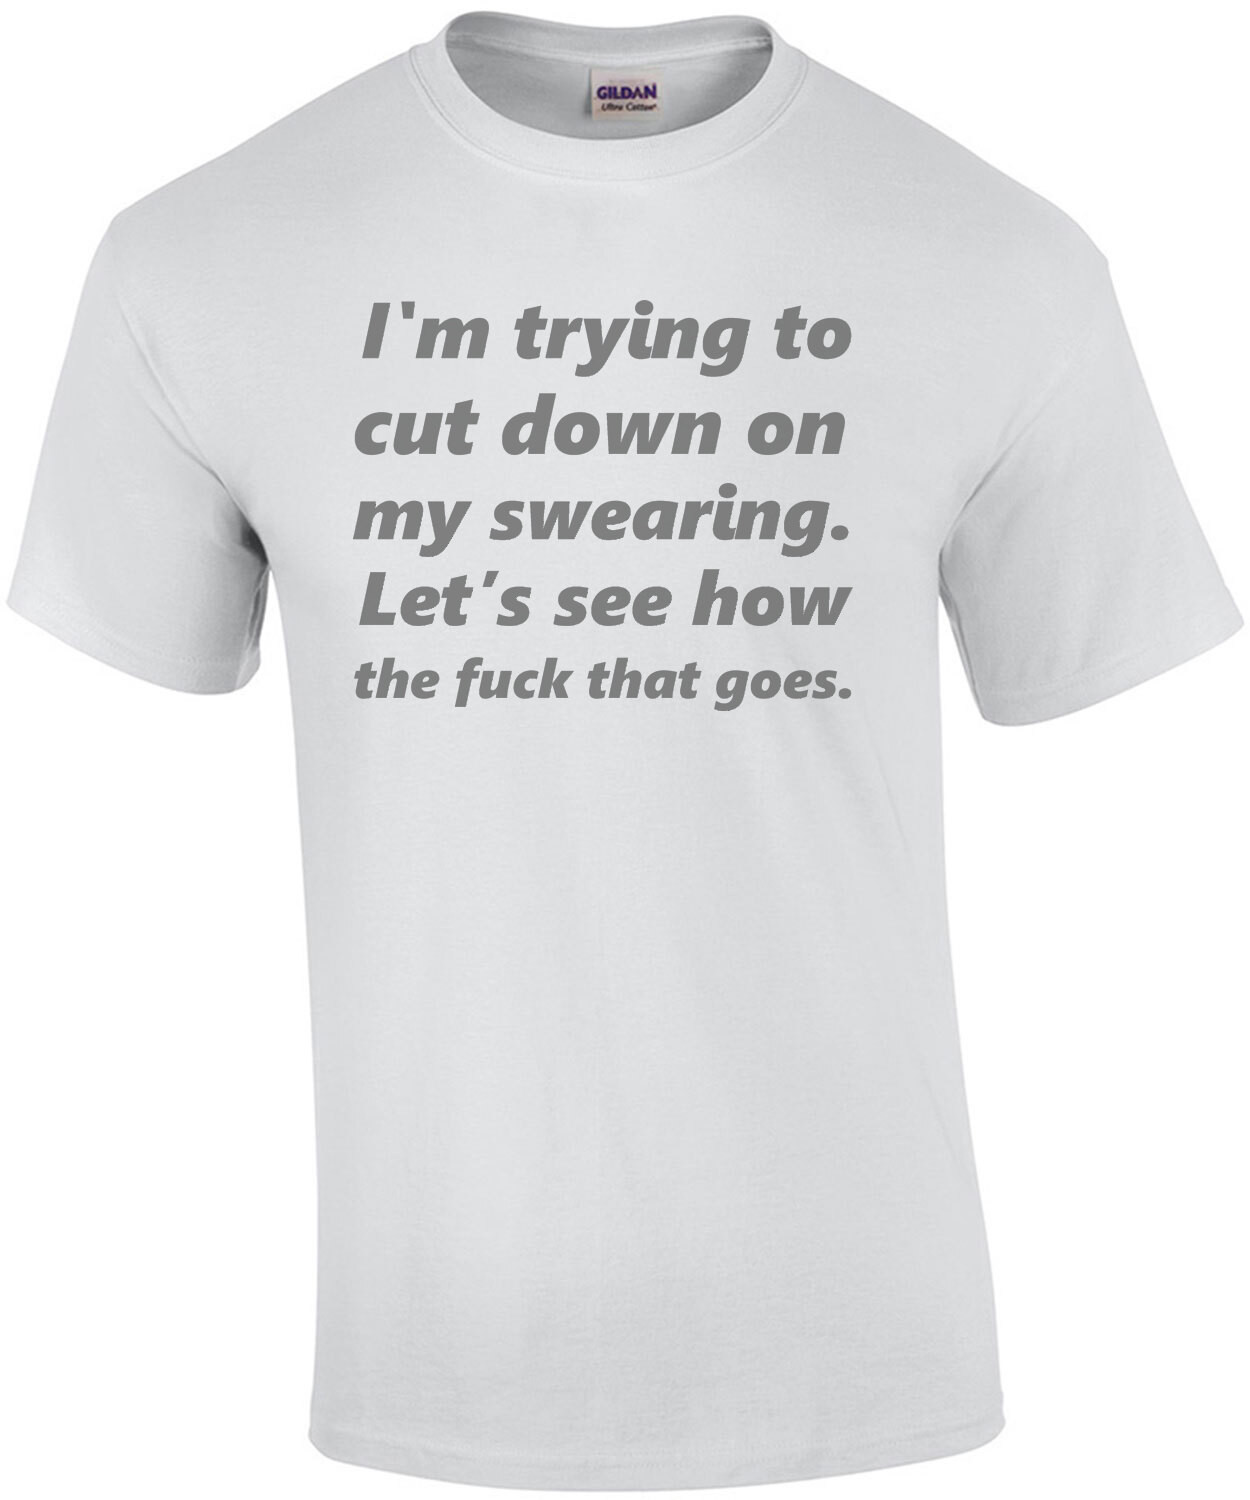 I'm trying to cut down on my swearing. Let's see how the fuck that goes. Funny sarcastic T-Shirt